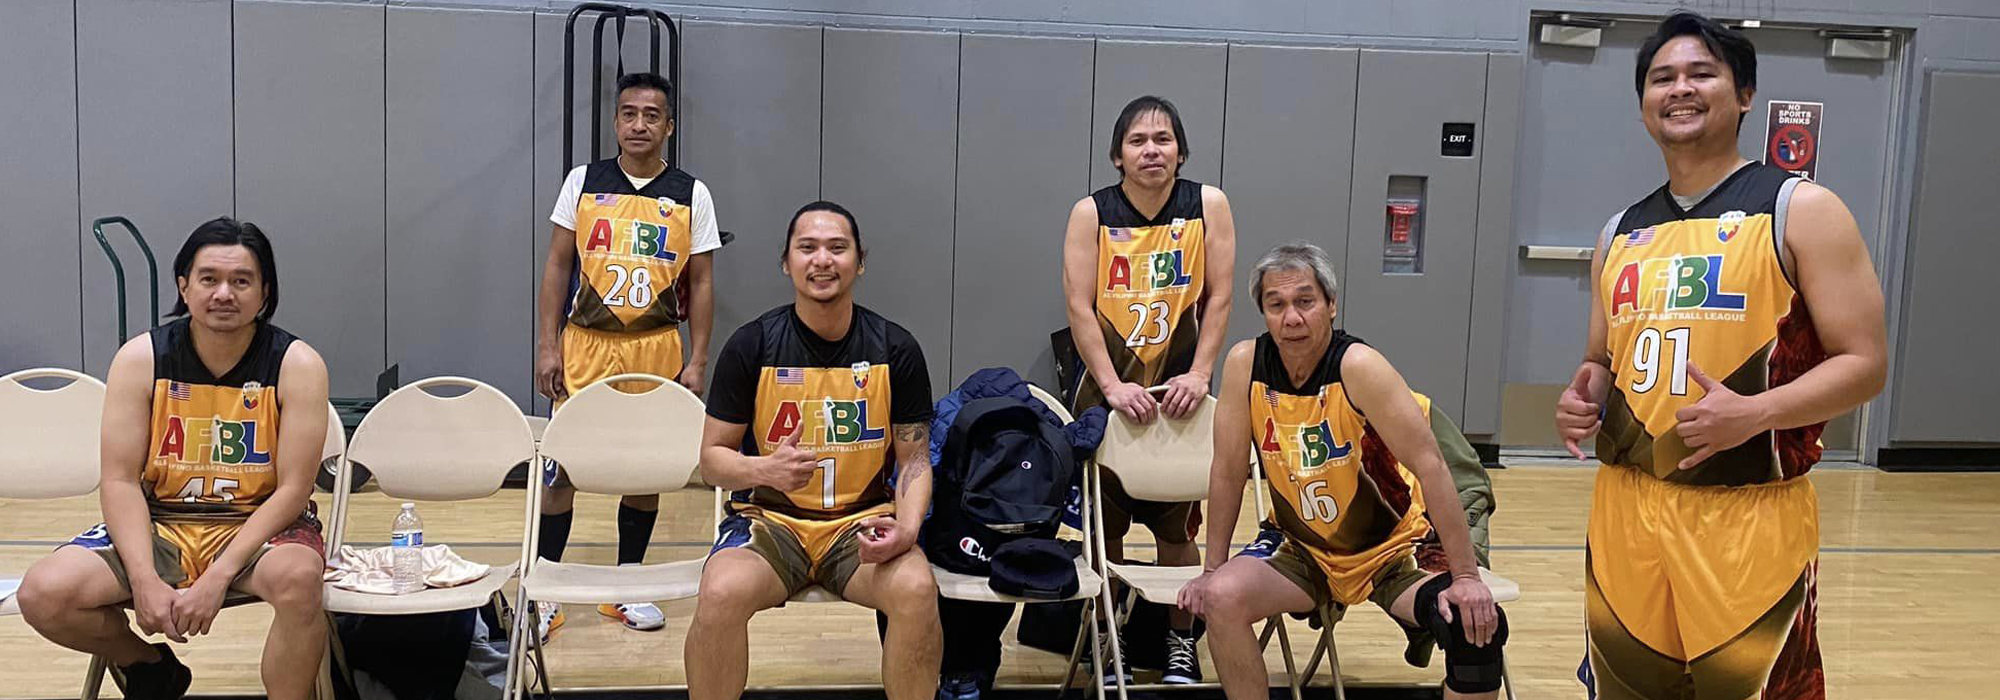 All Filipino Basketball League in Antelope Valley